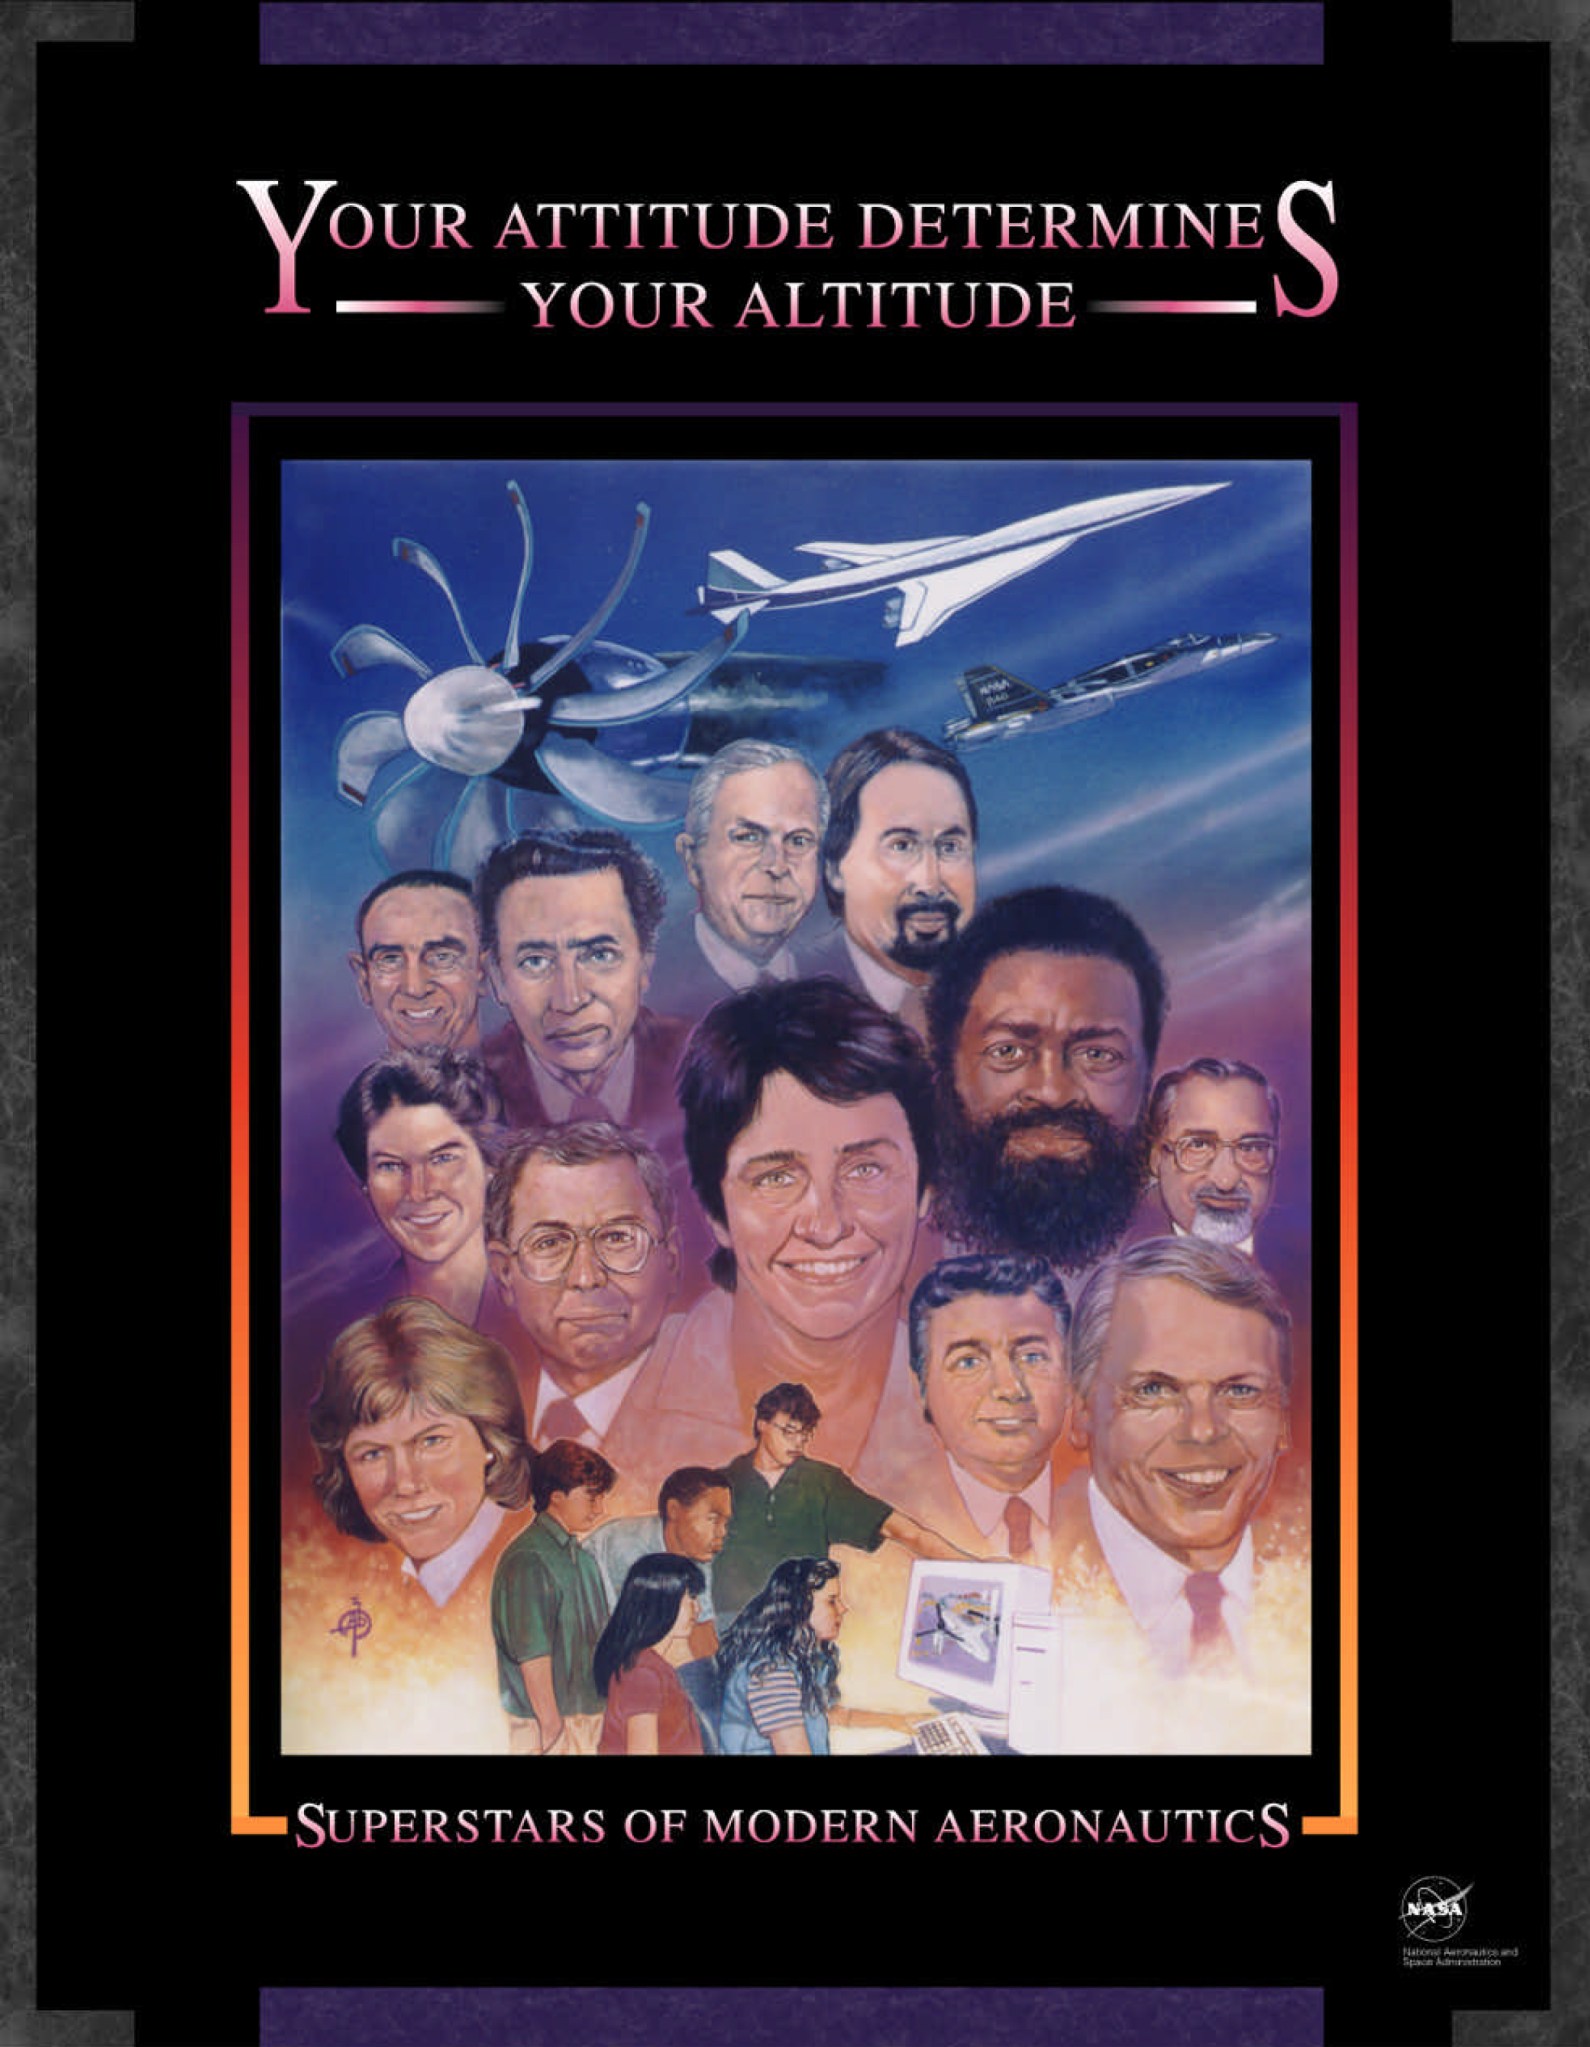 Illustrated faces of diverse people working in NASA aeronautics as well as an aircraft engine turbofan and aircraft heading for the skies. Text on top says, “Your Attitude Determines your Altitude” and bottom says “Superstars of Modern Aeronautics.”